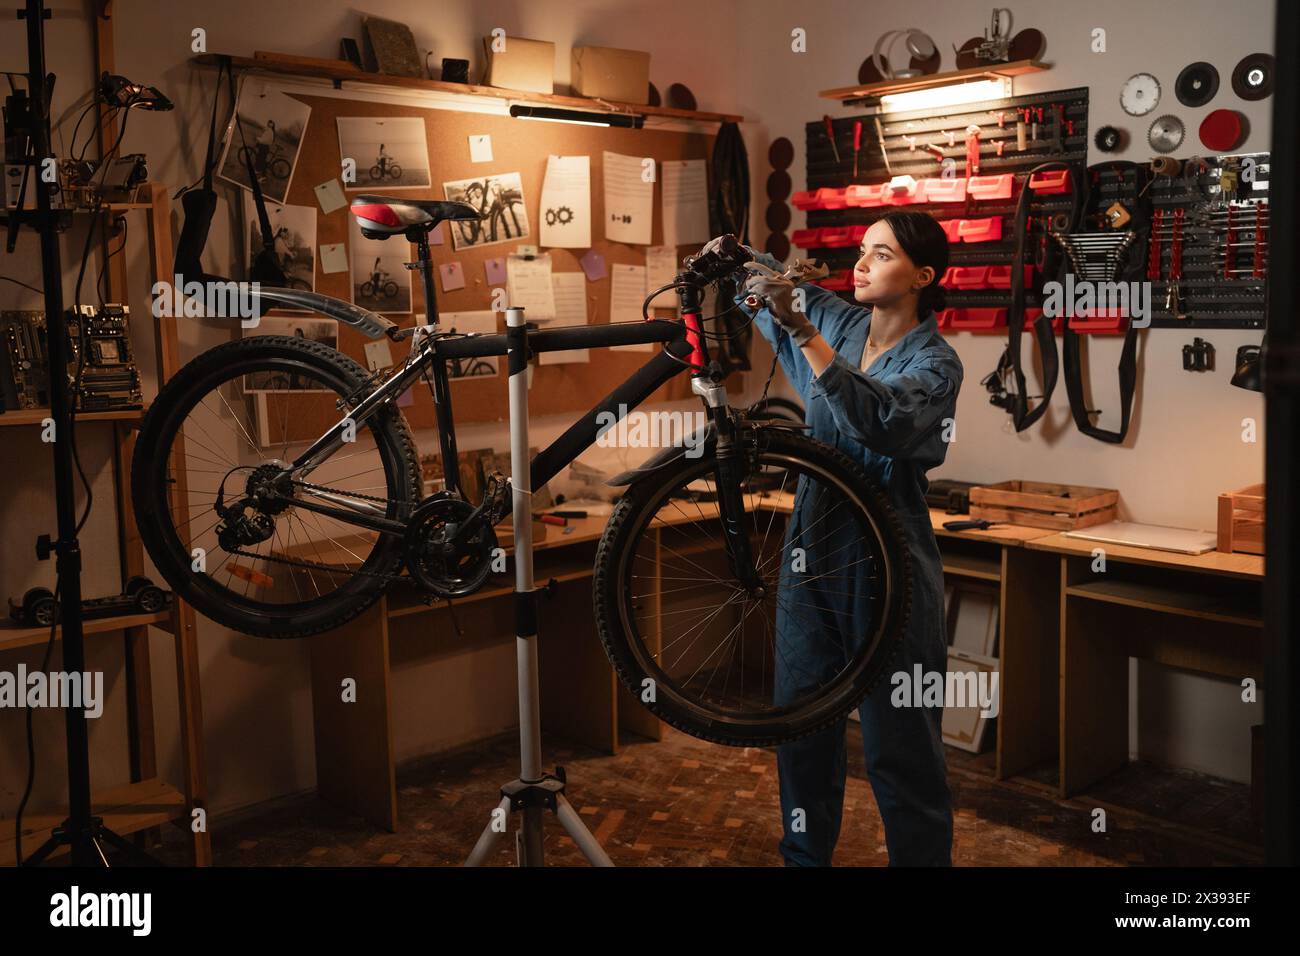 Bicycle female mechanic repairing bicycle doing his professional work in workshop or garage. Stock Photo